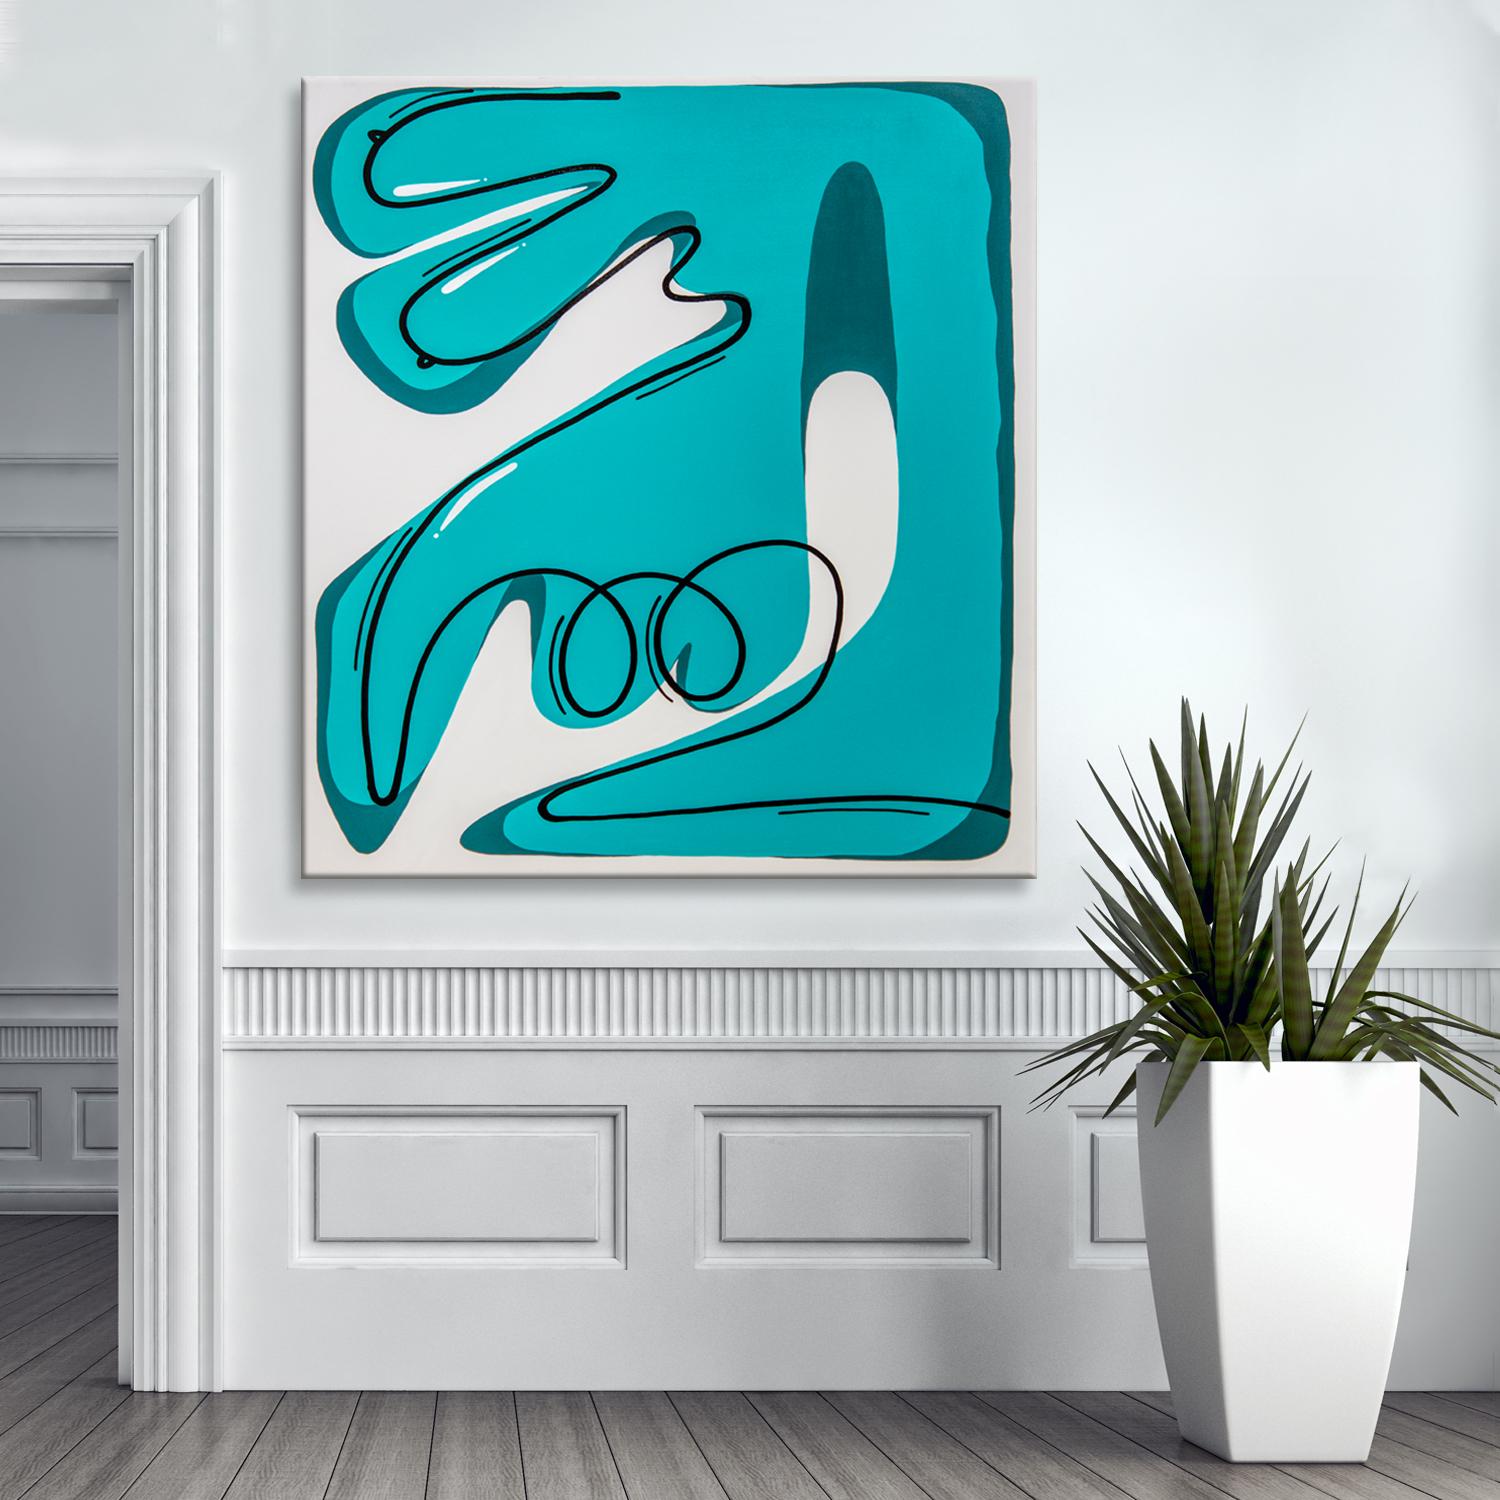 'Thinking About You' Wrapped Canvas Original Painting features an abstract female figure in vivid tones of turquoise, teal, black, and white. Exuding empowerment, Alejandra Linares’s artwork is a collective of rich color and strong abstract feminine